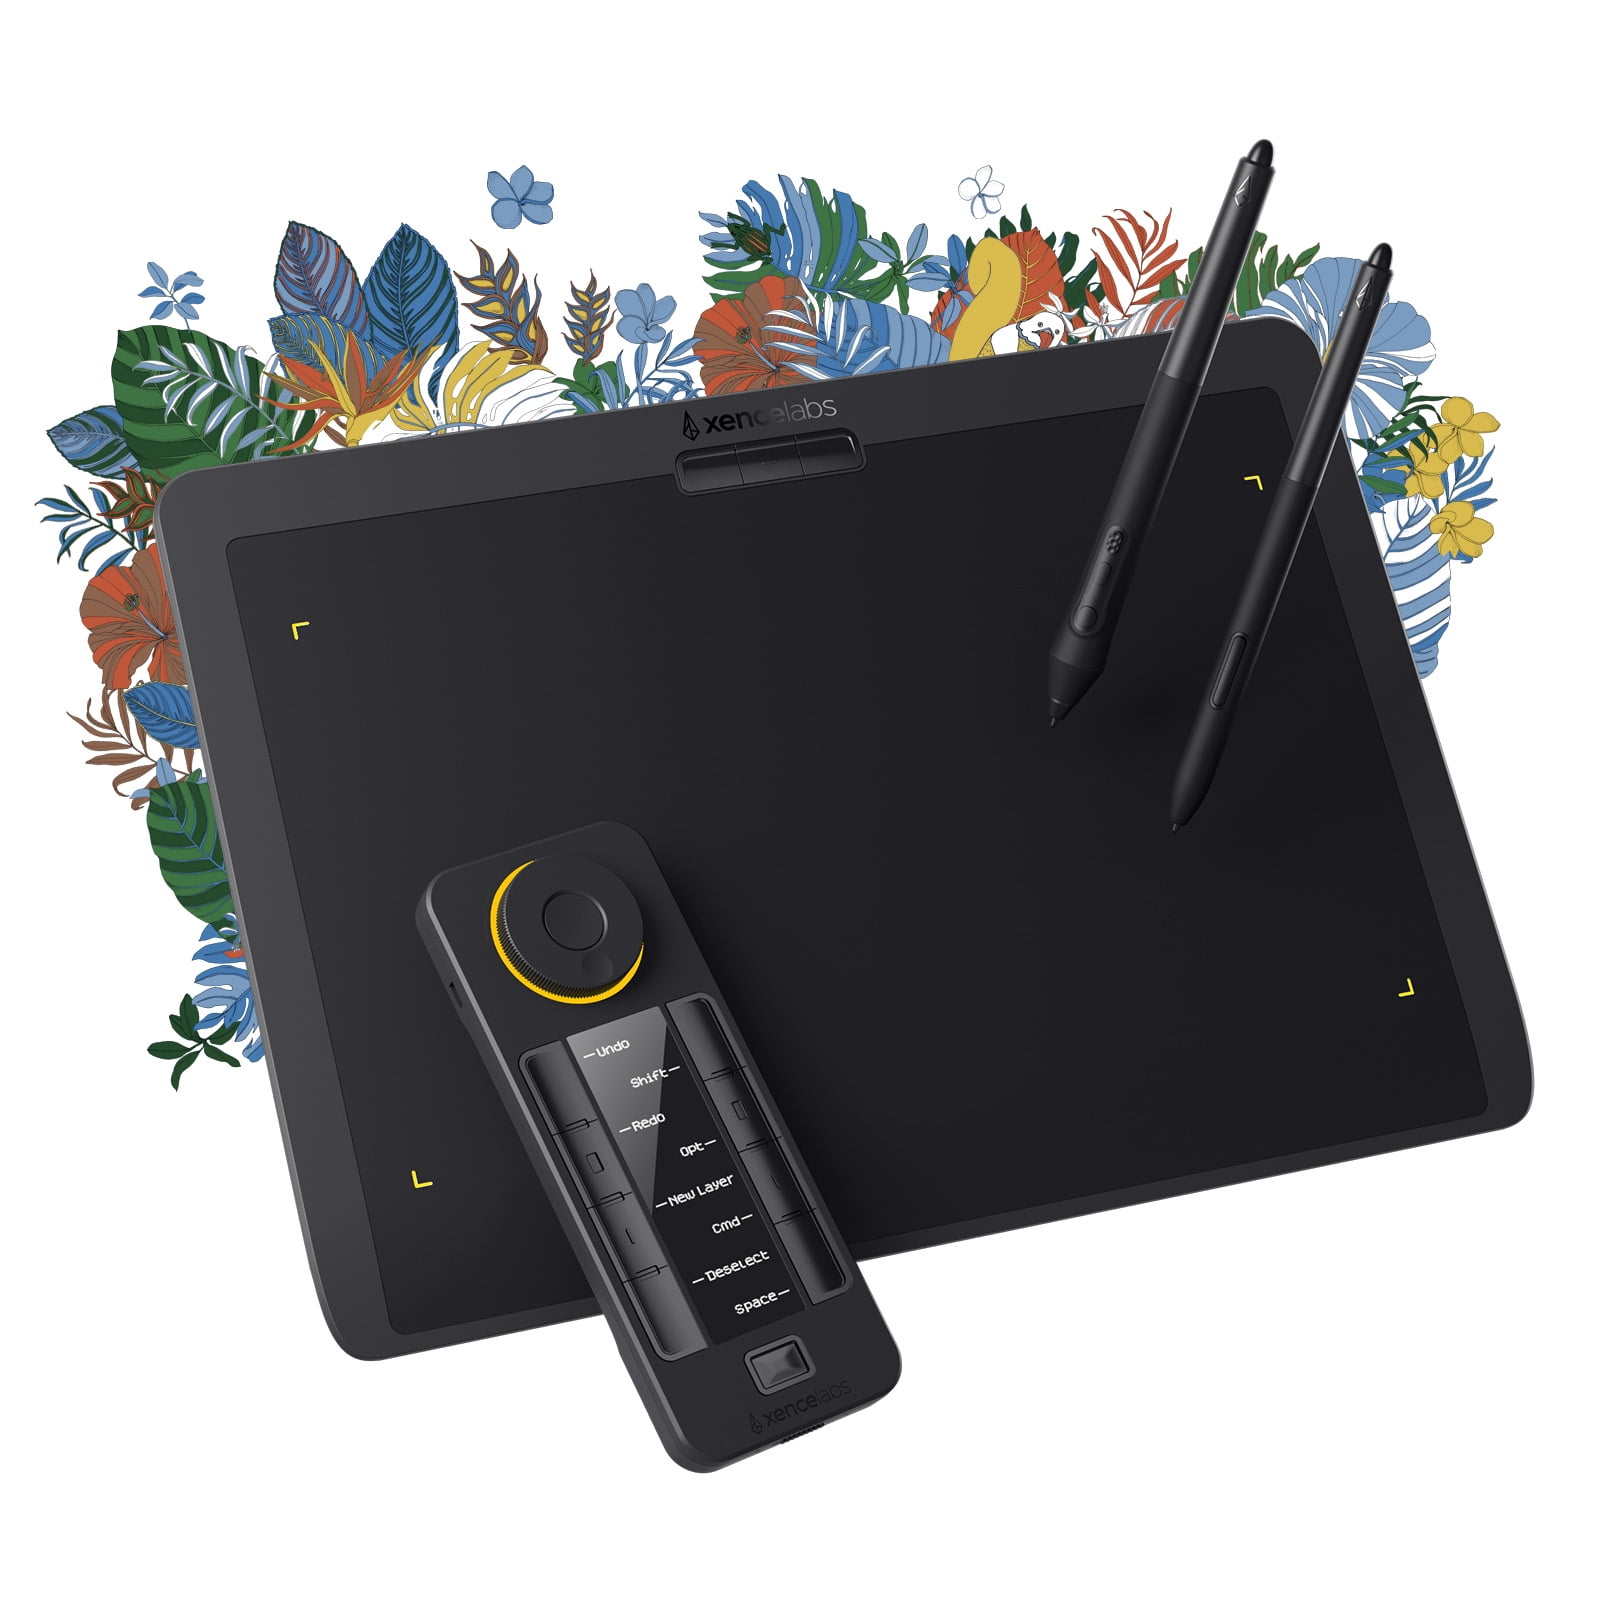 Wacom Intuos Graphics Drawing Tablet, 3 Bonus Software Included, 7.9x  6.3, Black, Small (CTL4100) 